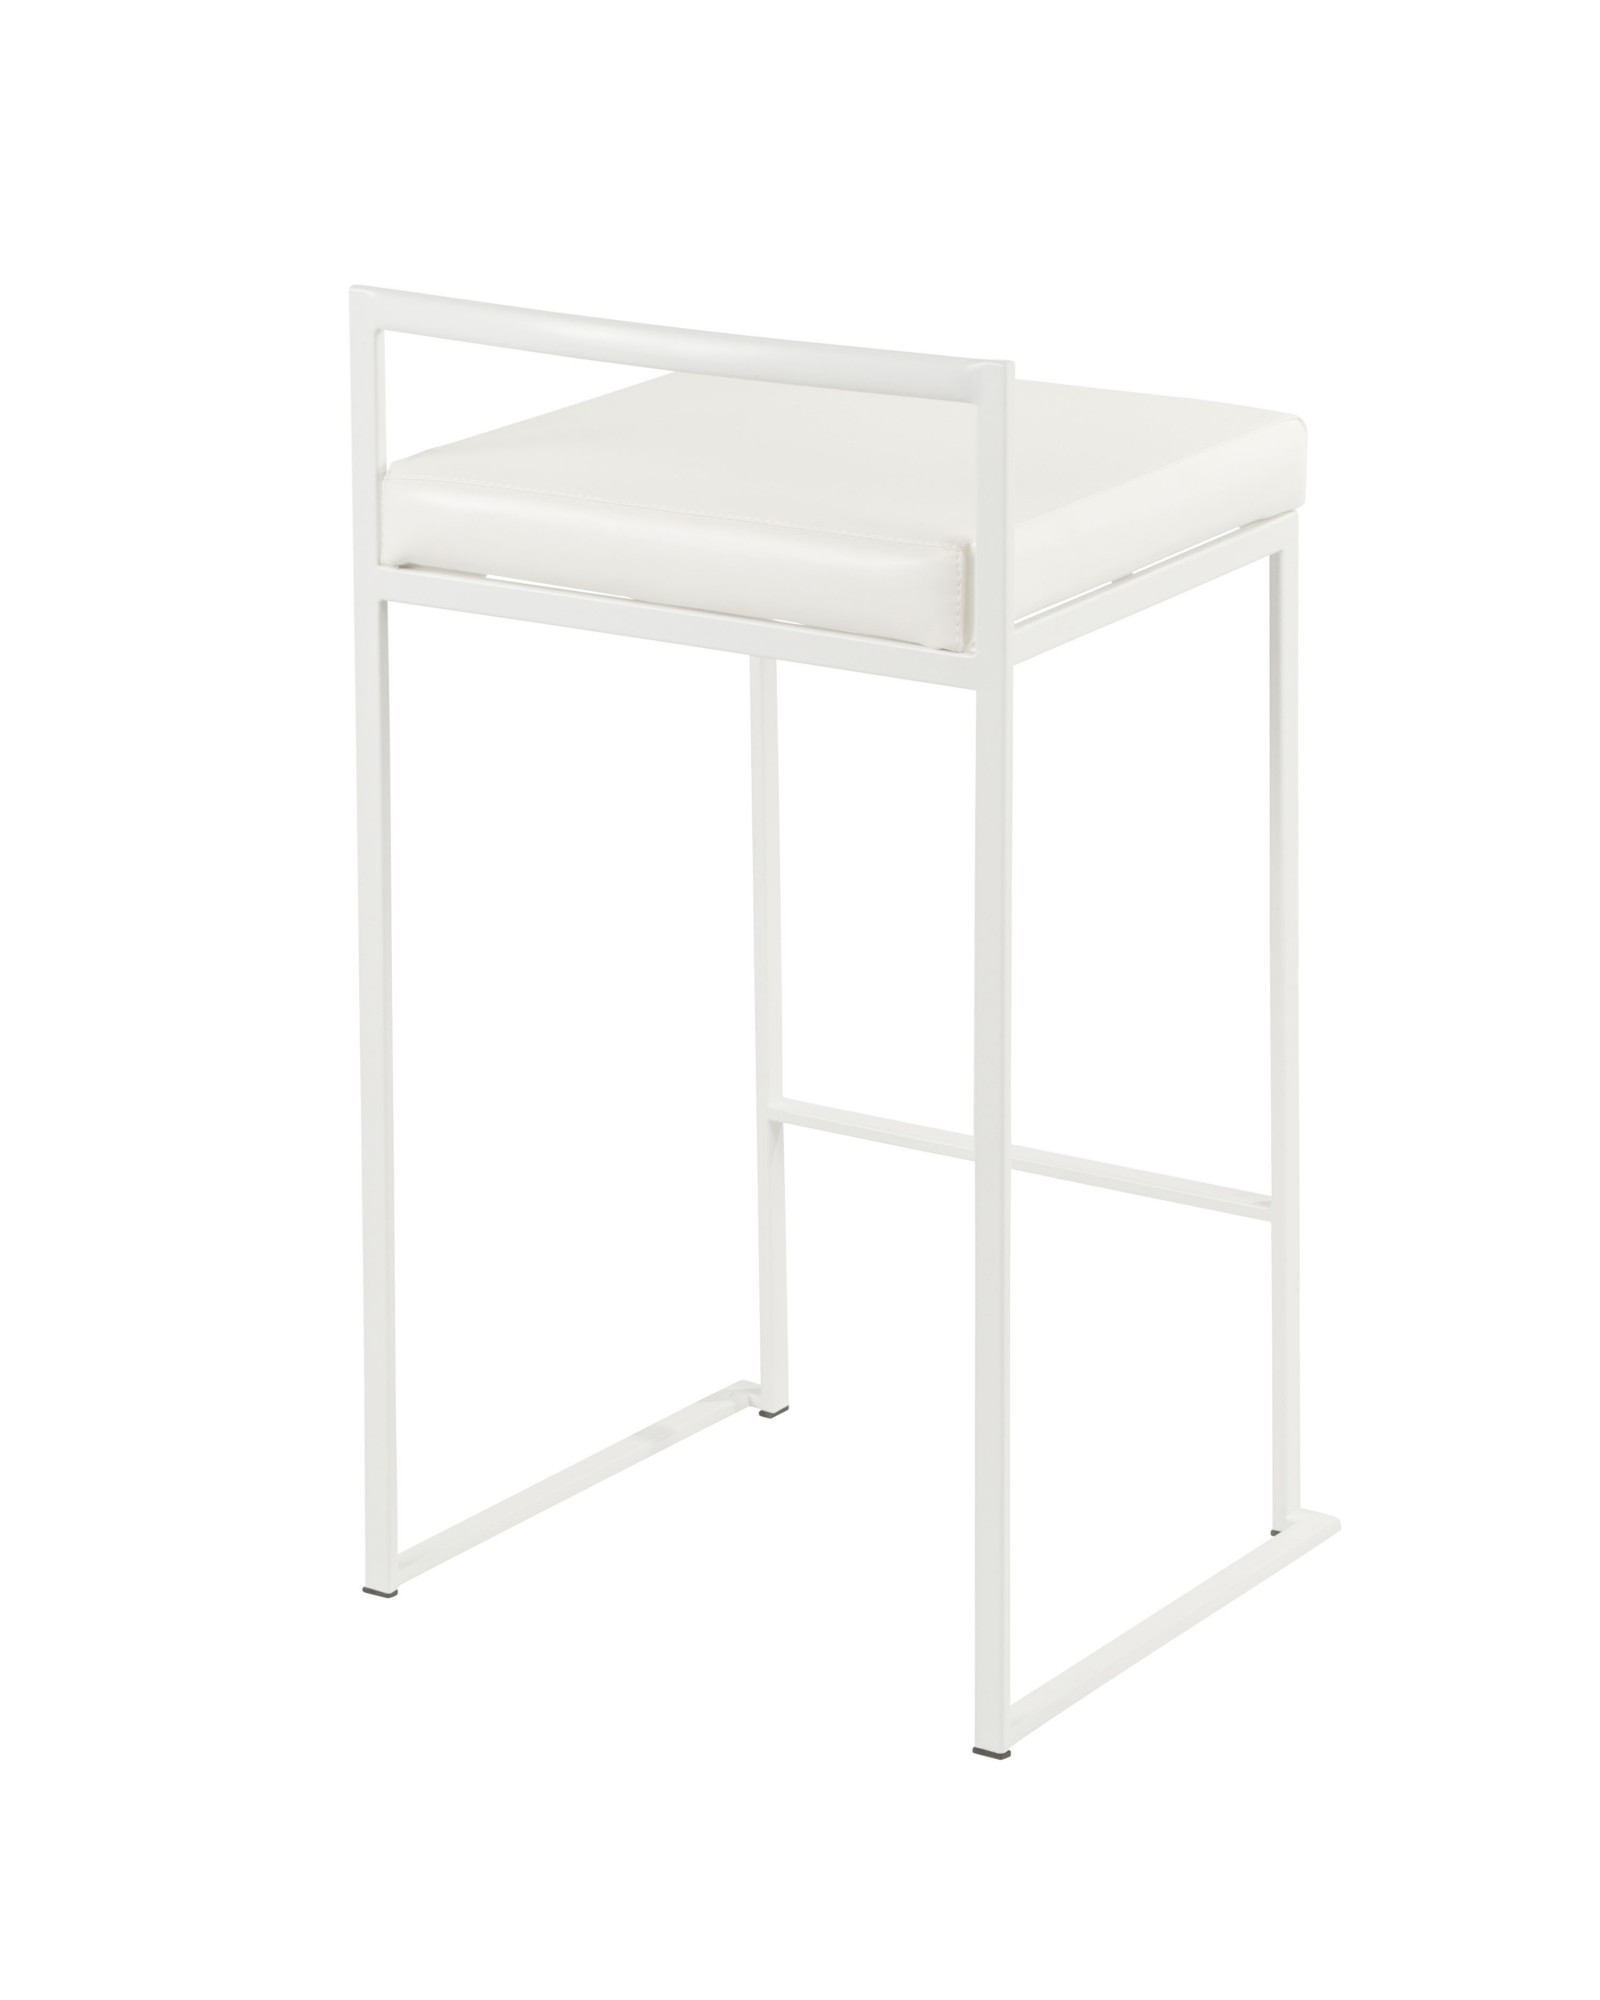 Fuji Contemporary Stackable Counter Stool in White with White Faux Leather Cushion - Set of 2